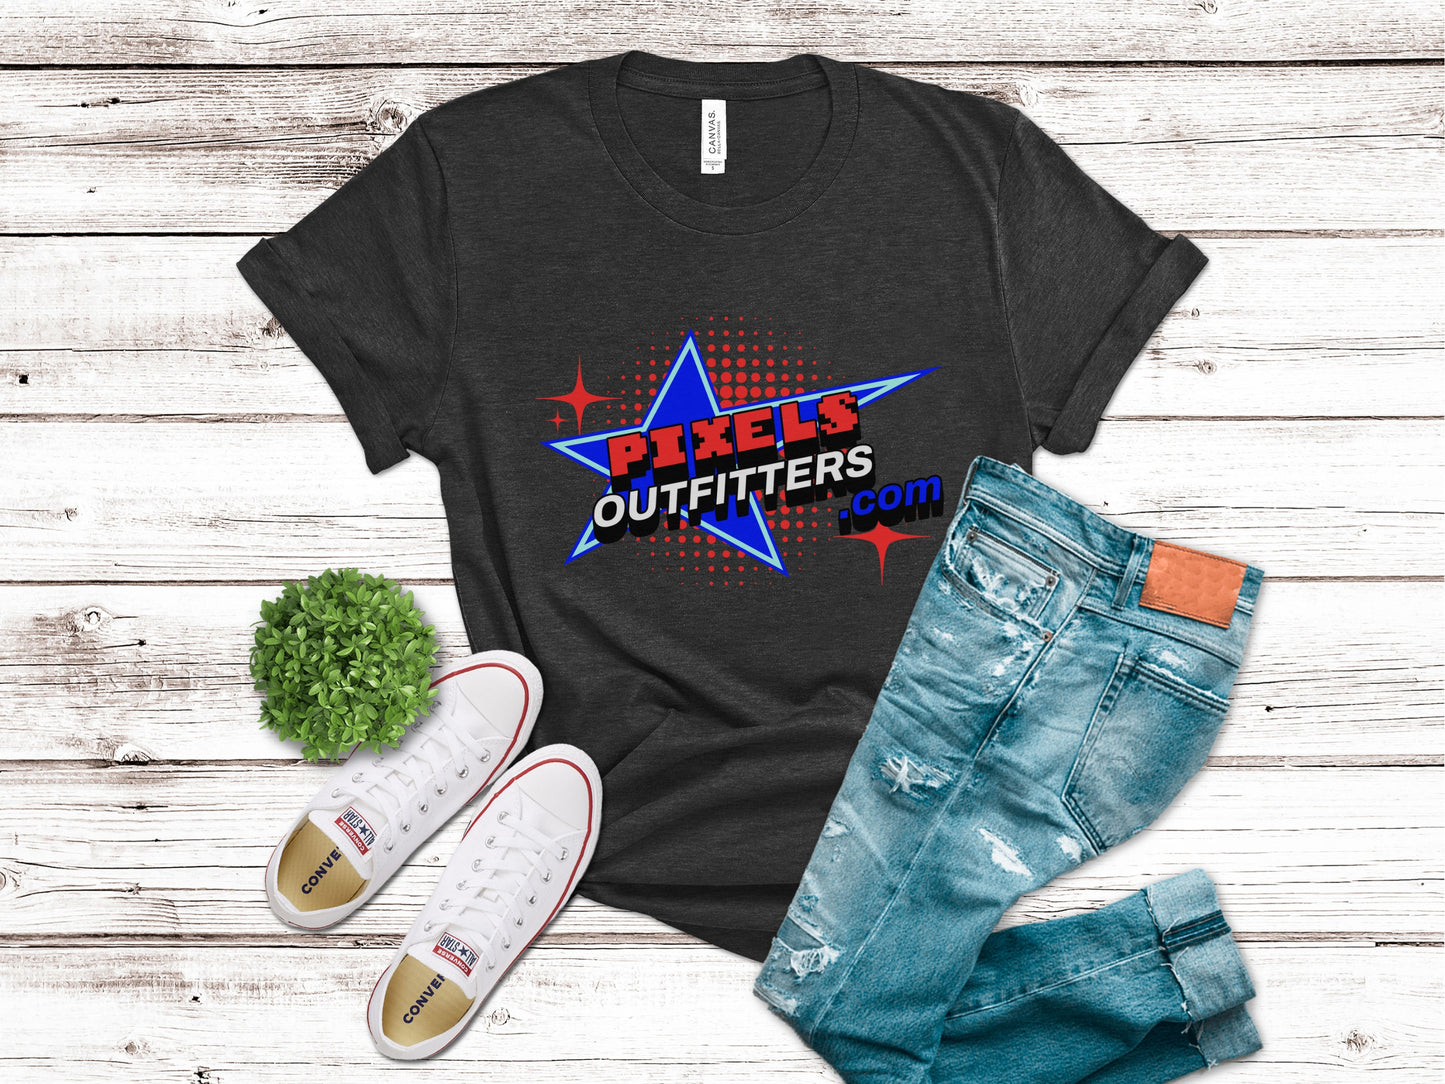 YOU'RE A STAR PIXELS OUTFITTERS